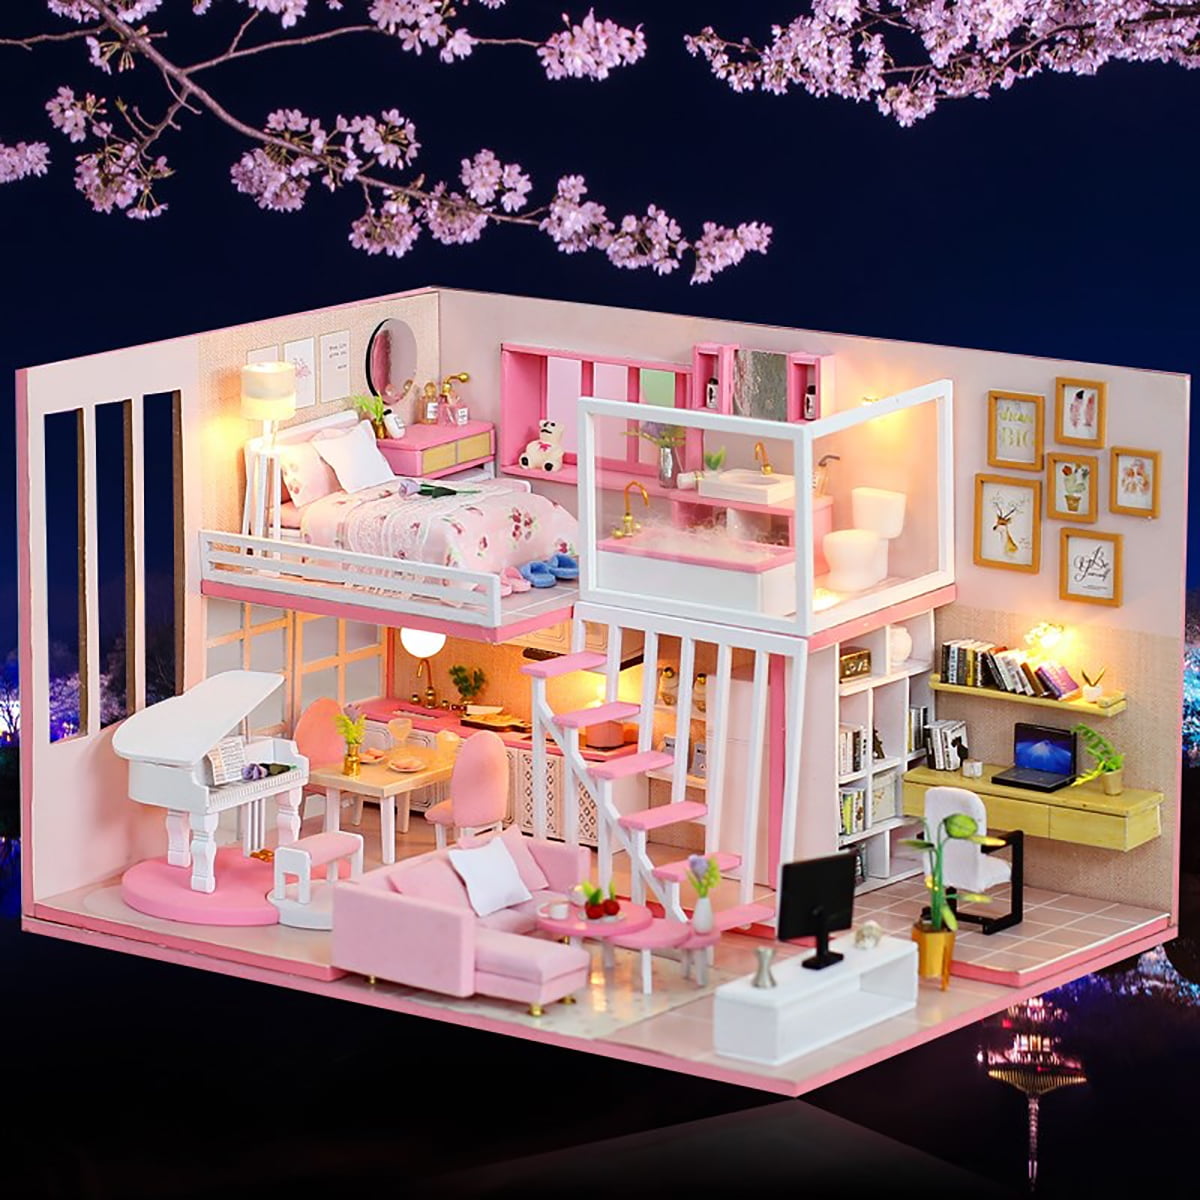 Details about   DIY House Wooden Doll Houses Miniature Furniture Kit Toys for Children Gift